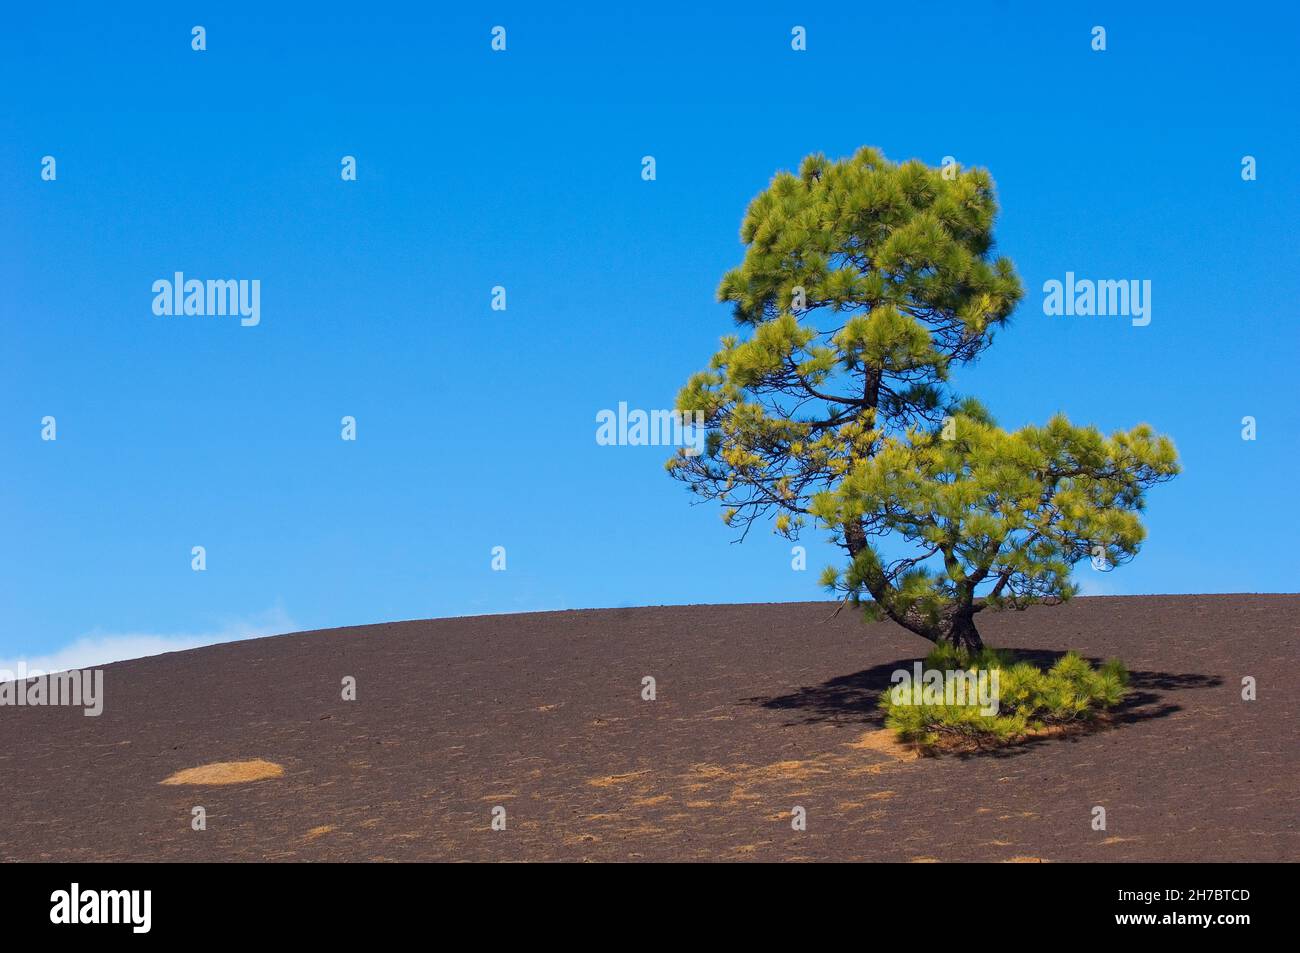 SPAIN, CANARY ISLANDS, TENERIFE,  THE DRY LANDSCAPE IN THE NATIONAL PARK OF TEIDE Stock Photo